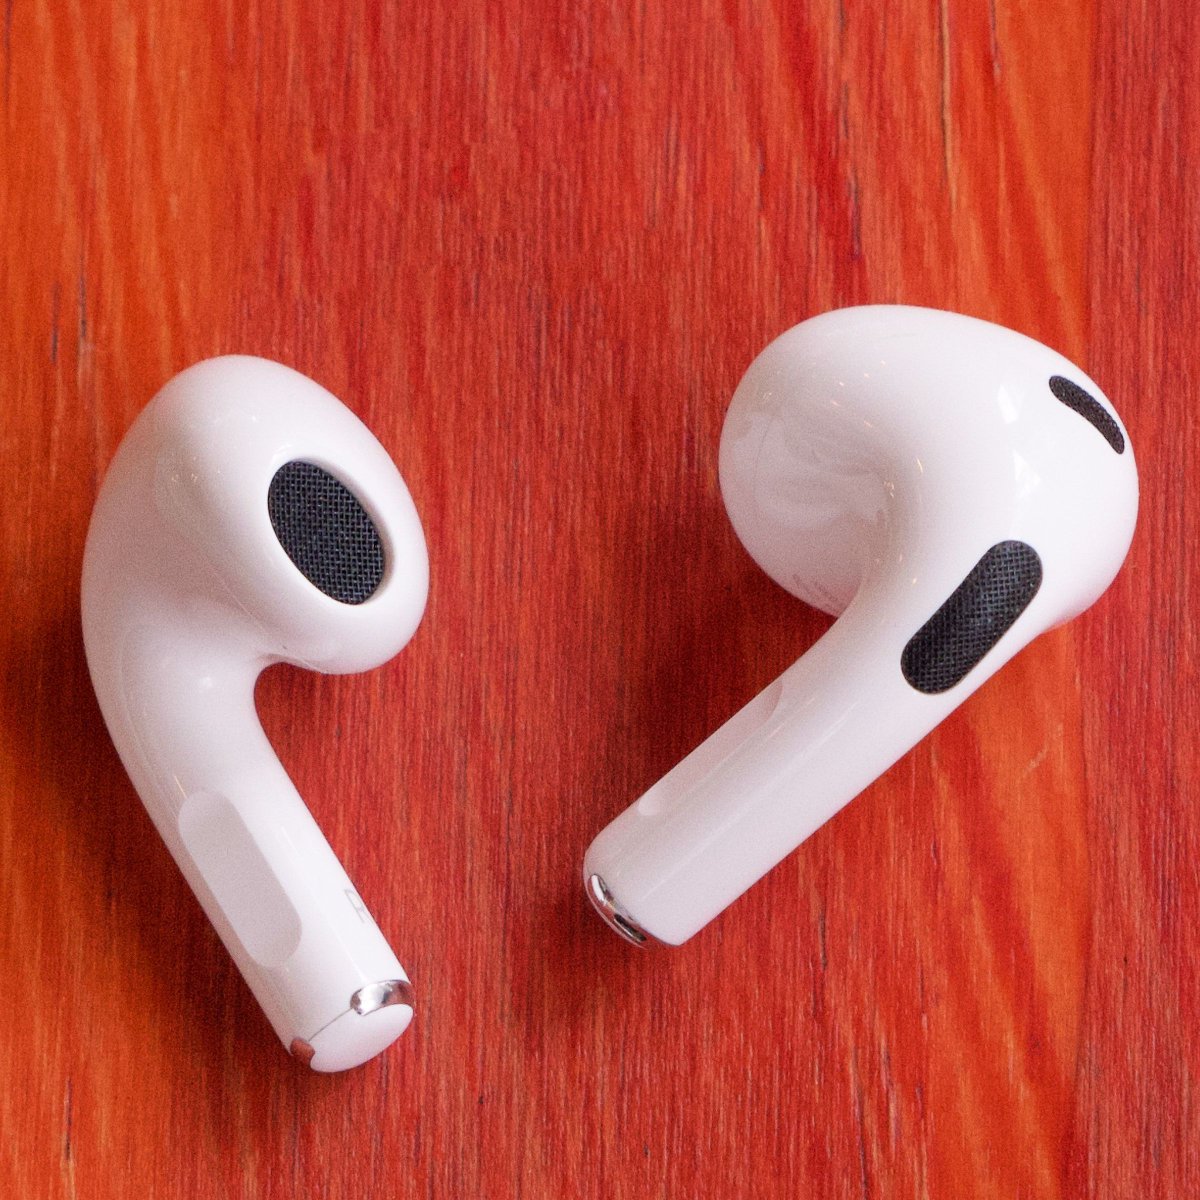 #AirPods #Apples #sale #thirdgen #Year Apple’s third-gen AirPods are on sale for their best of the year tinyurl.com/2k45z4jc 
Let’s face it: we all know how spotty Wi-Fi can be. Thankfully, if you’re looking for a relatively ...